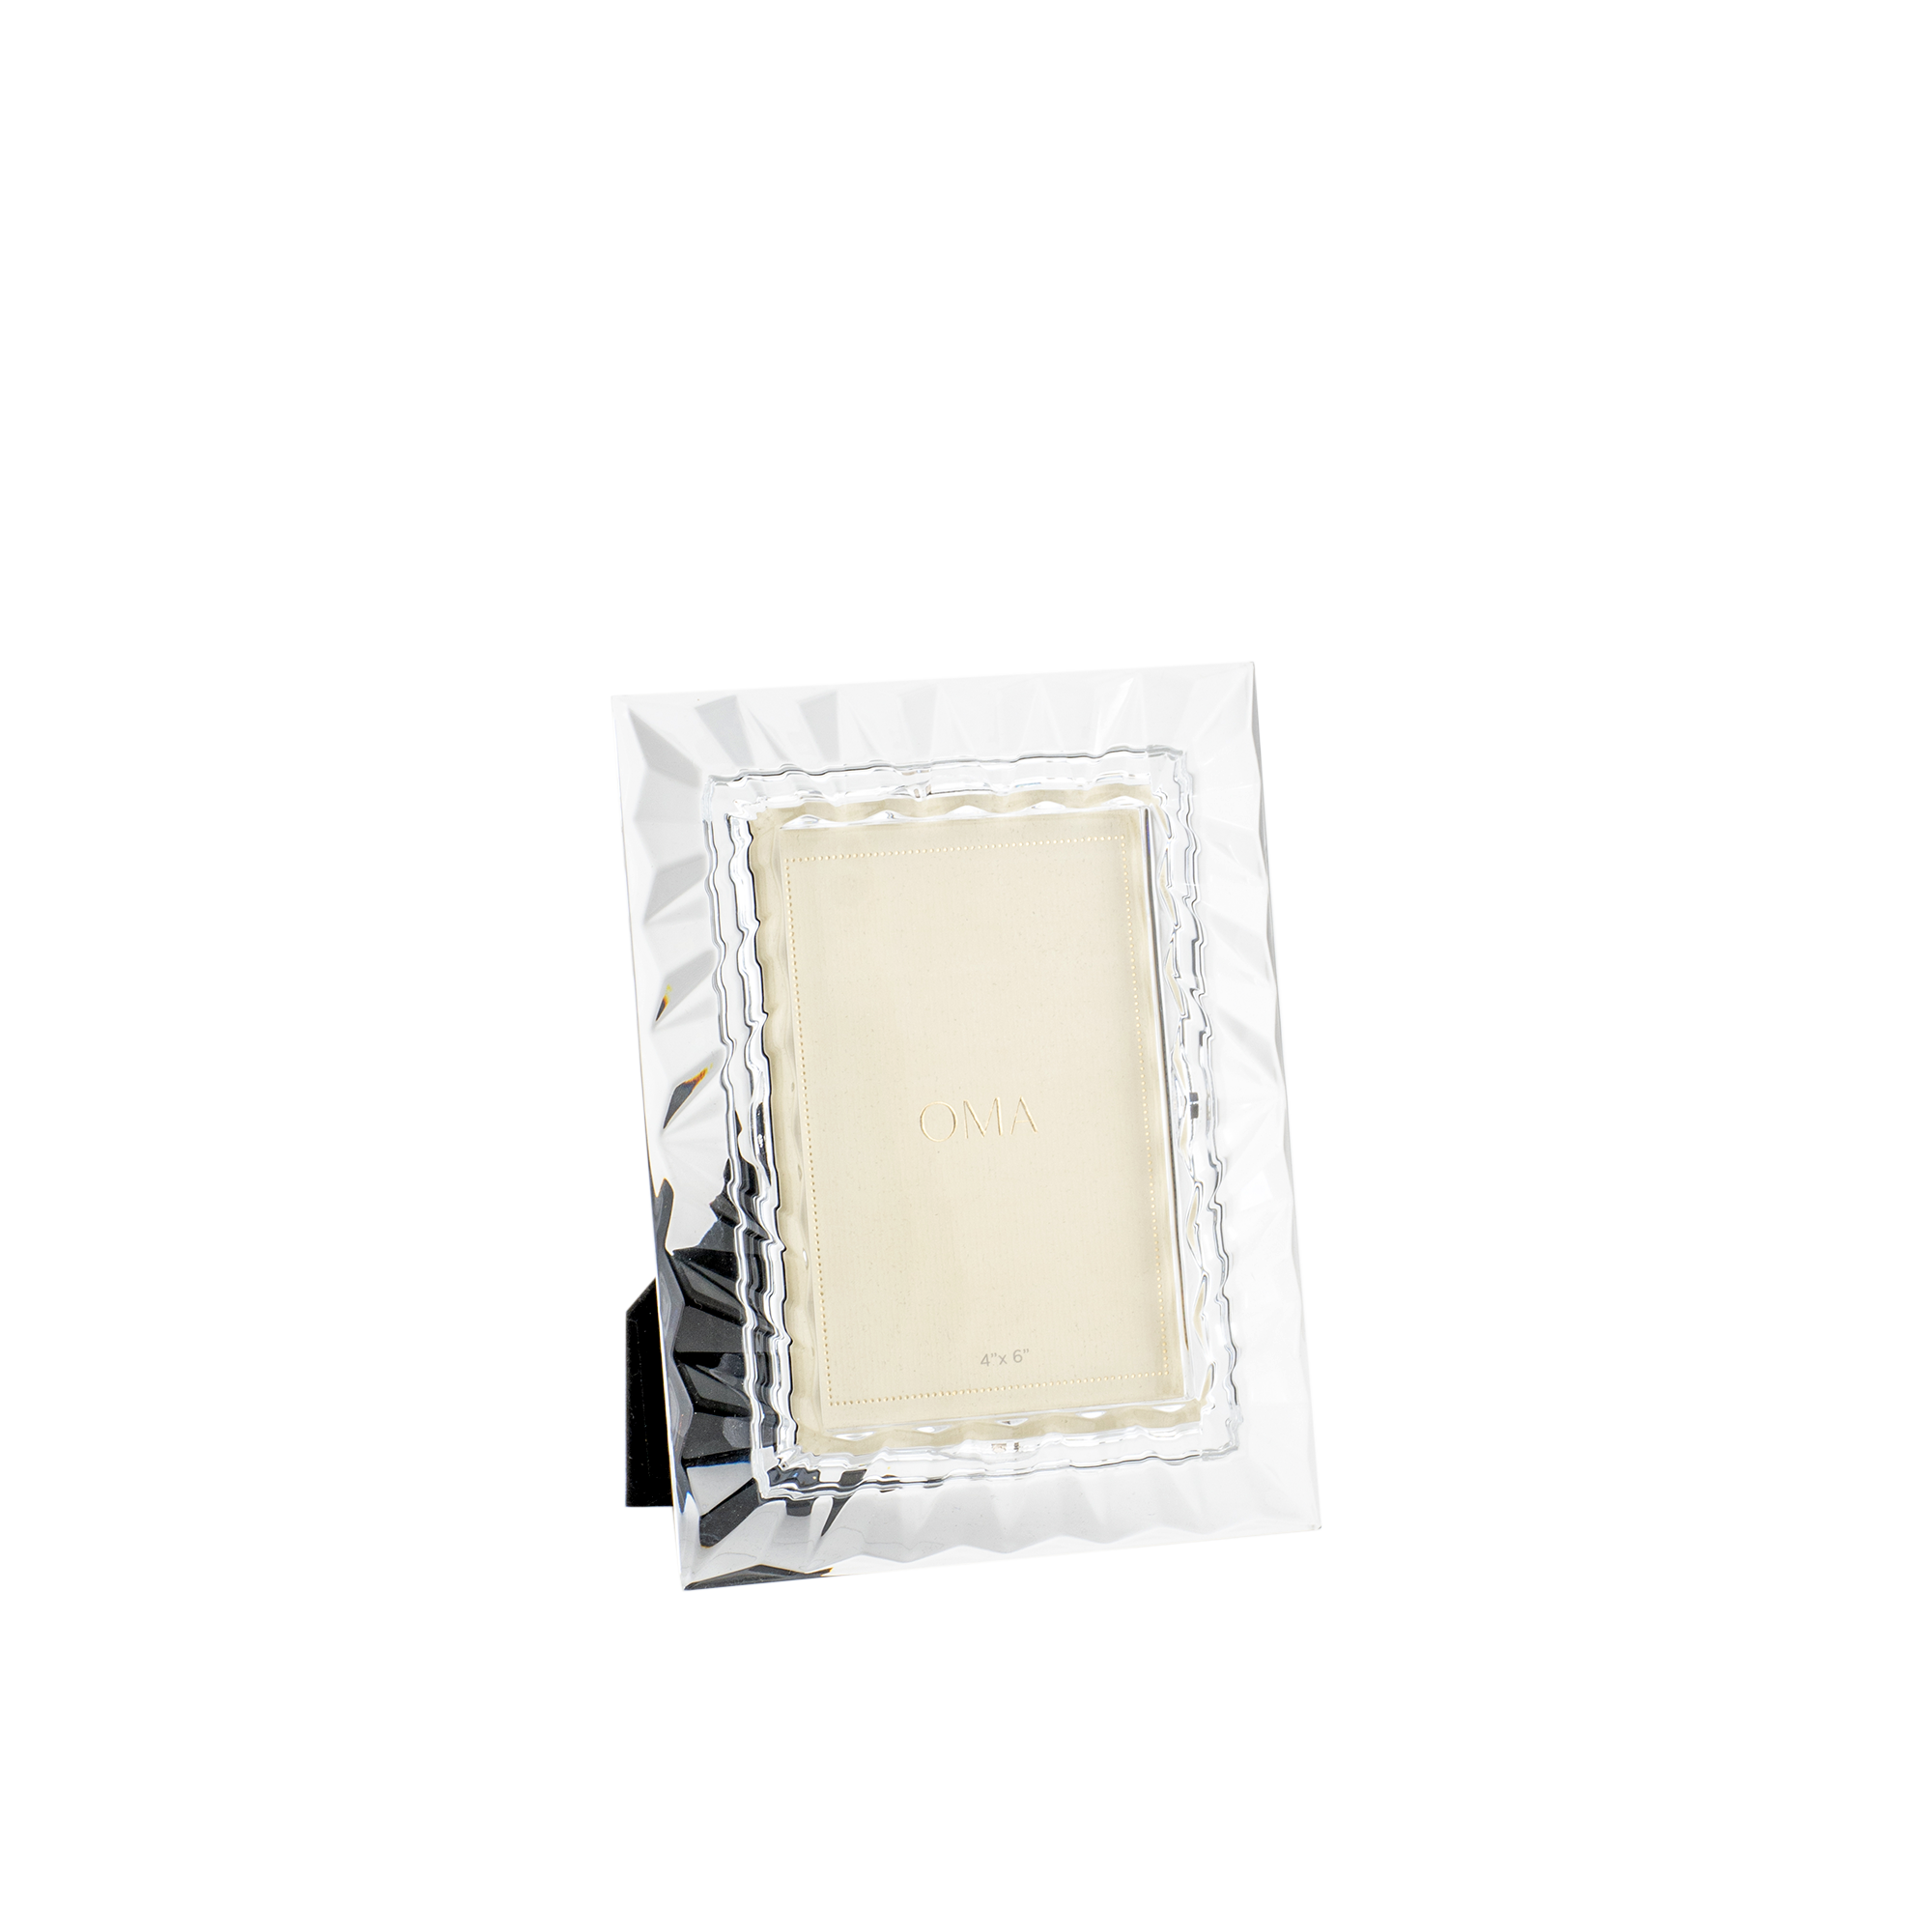 Lisa Clear Picture Frame